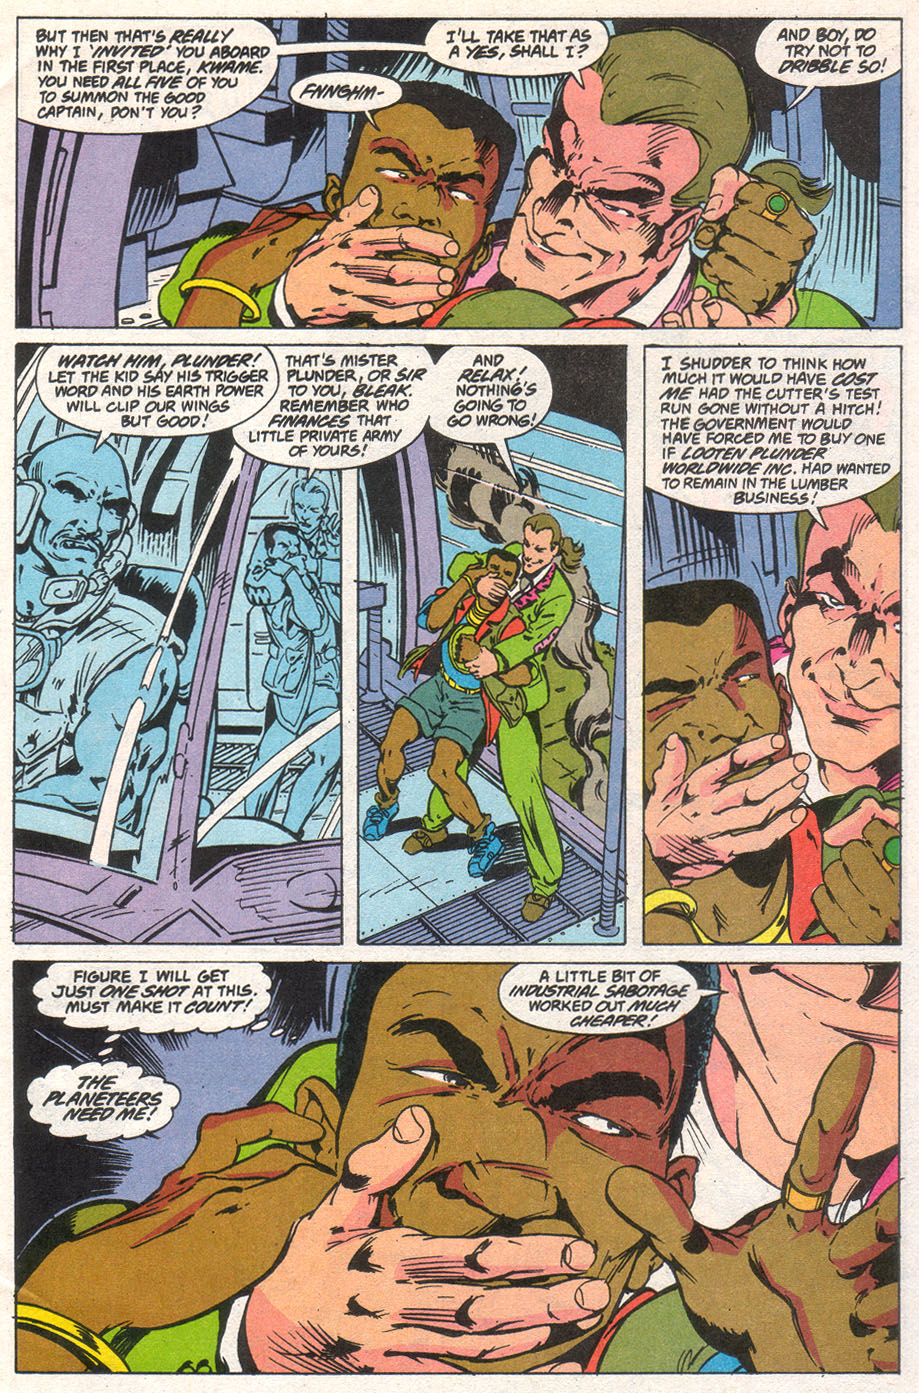 Captain Planet and the Planeteers 12 Page 4